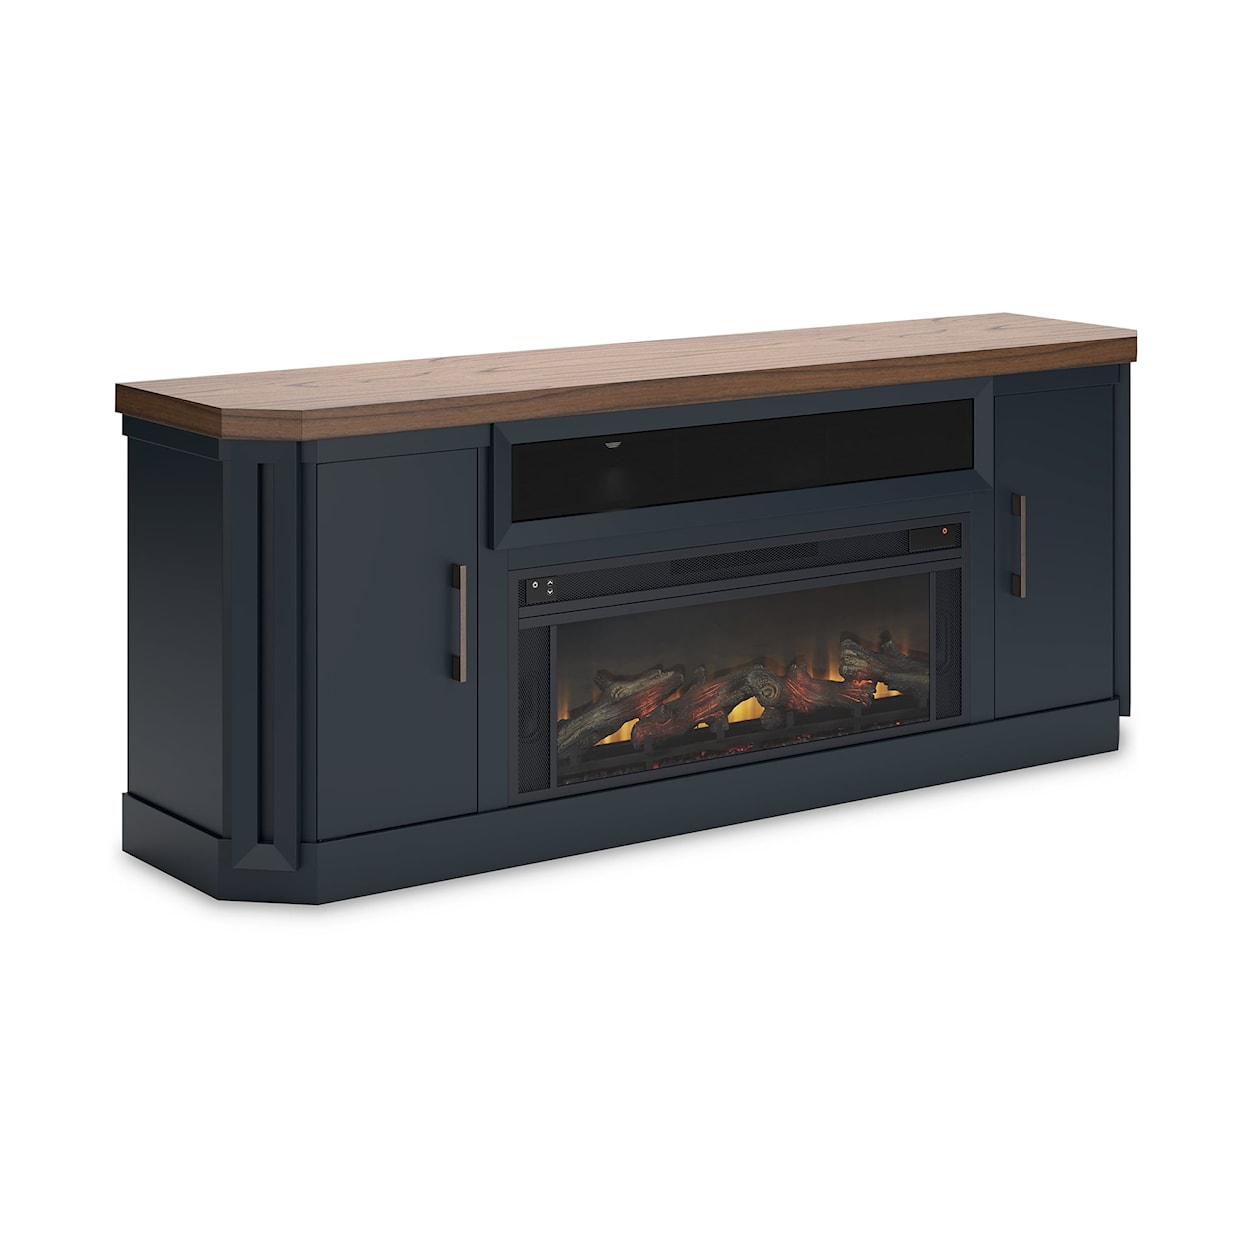 Signature Design by Ashley Landocken 83" TV Stand with Electric Fireplace